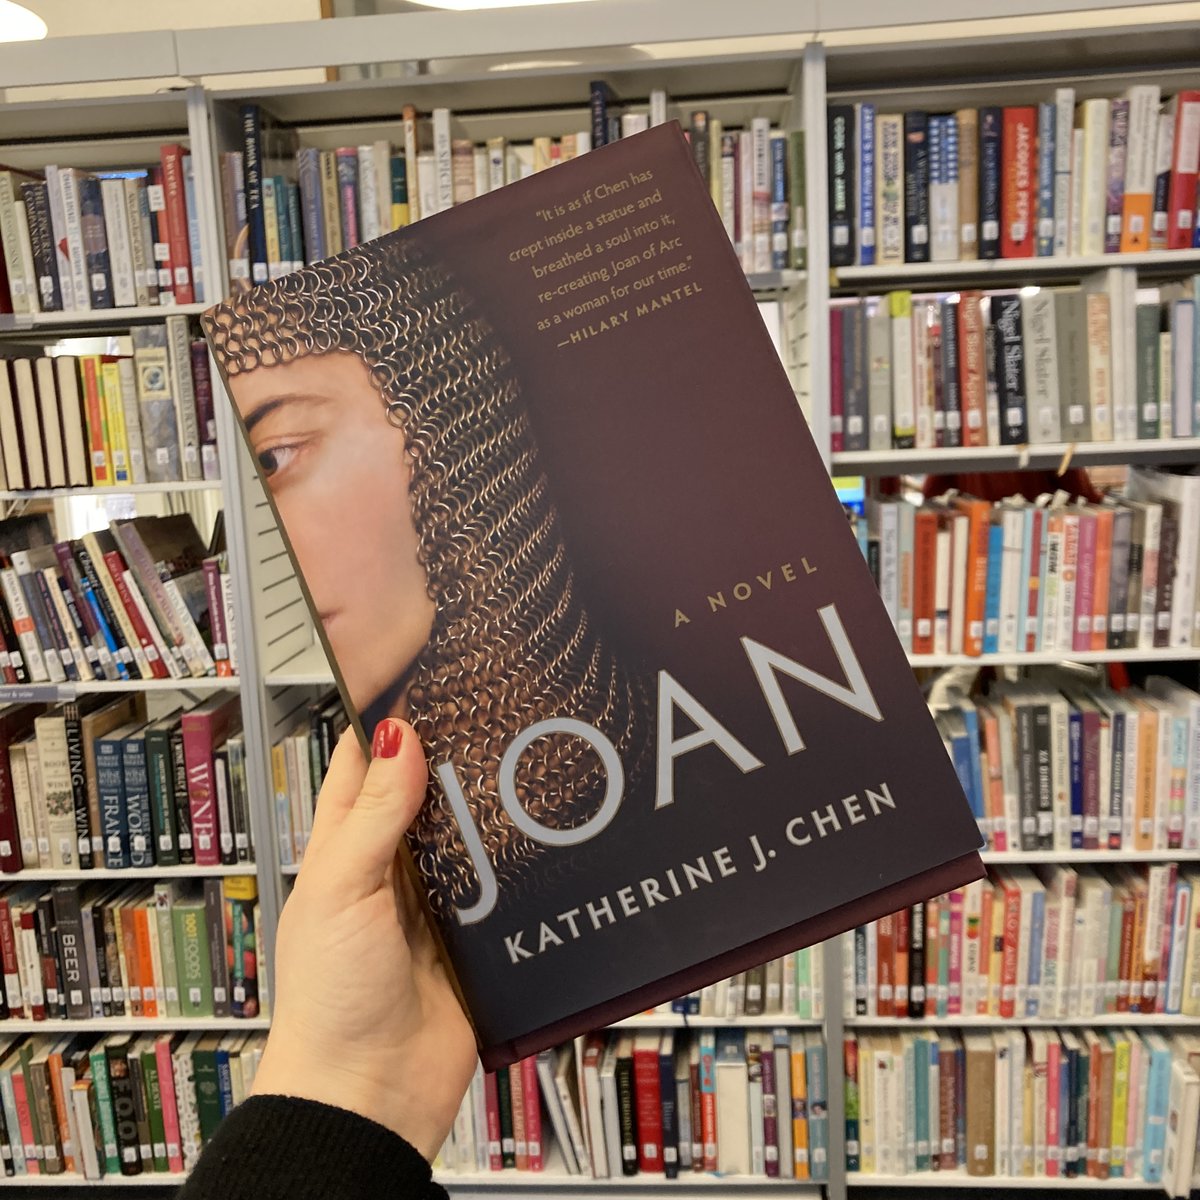 To celebrate Joan by Katherine J. Chen (the winner of this year's Book Award), we've curated a selection of biographies and other literary renderings of this legendary historical figure, including Mary Gordon's biography of Joan of Arc which inspired Chen to write her novel.